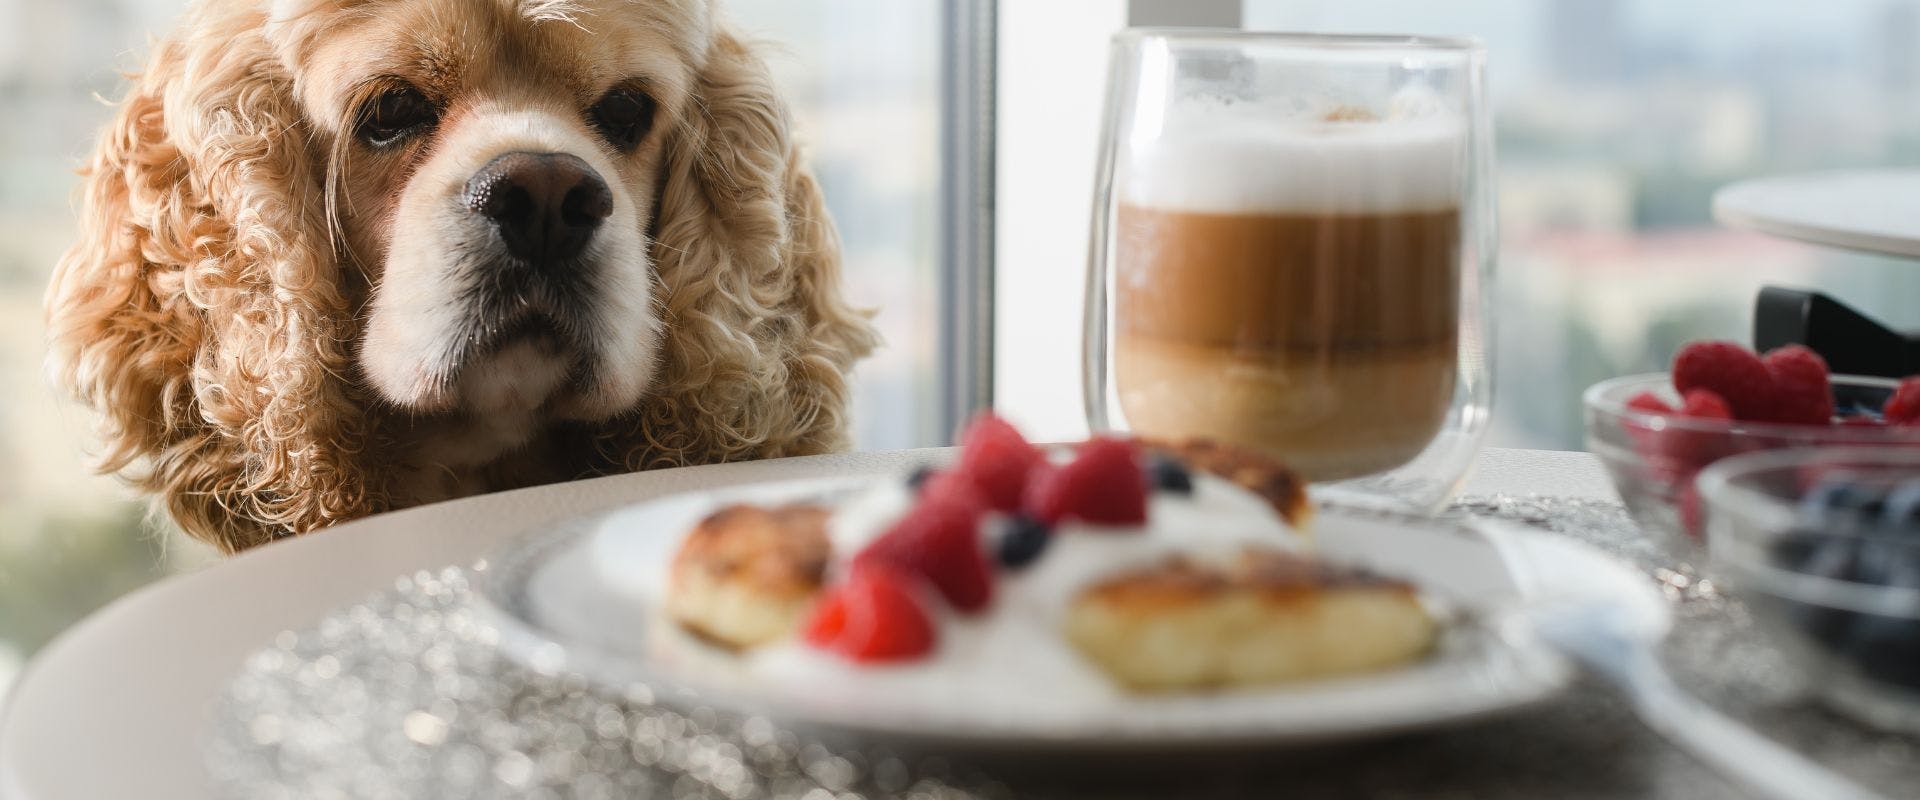 Beige dog looking at raspberries, pancakes and a latte